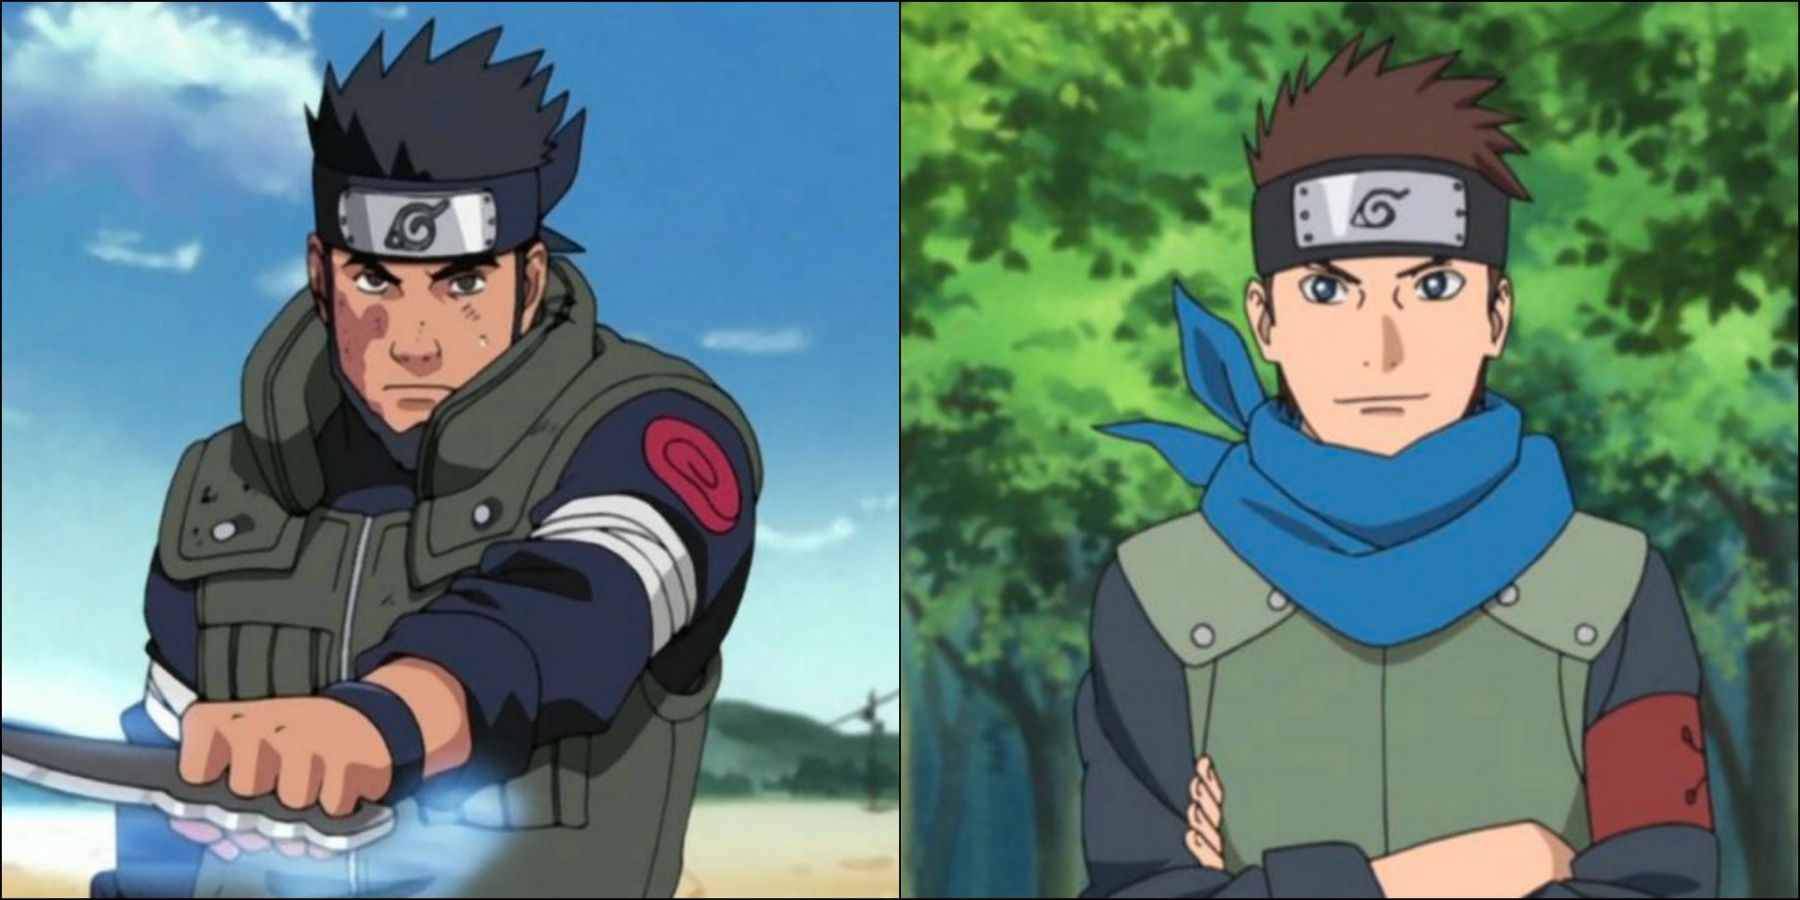 Who is the weakest Jonin in Naruto? - Quora